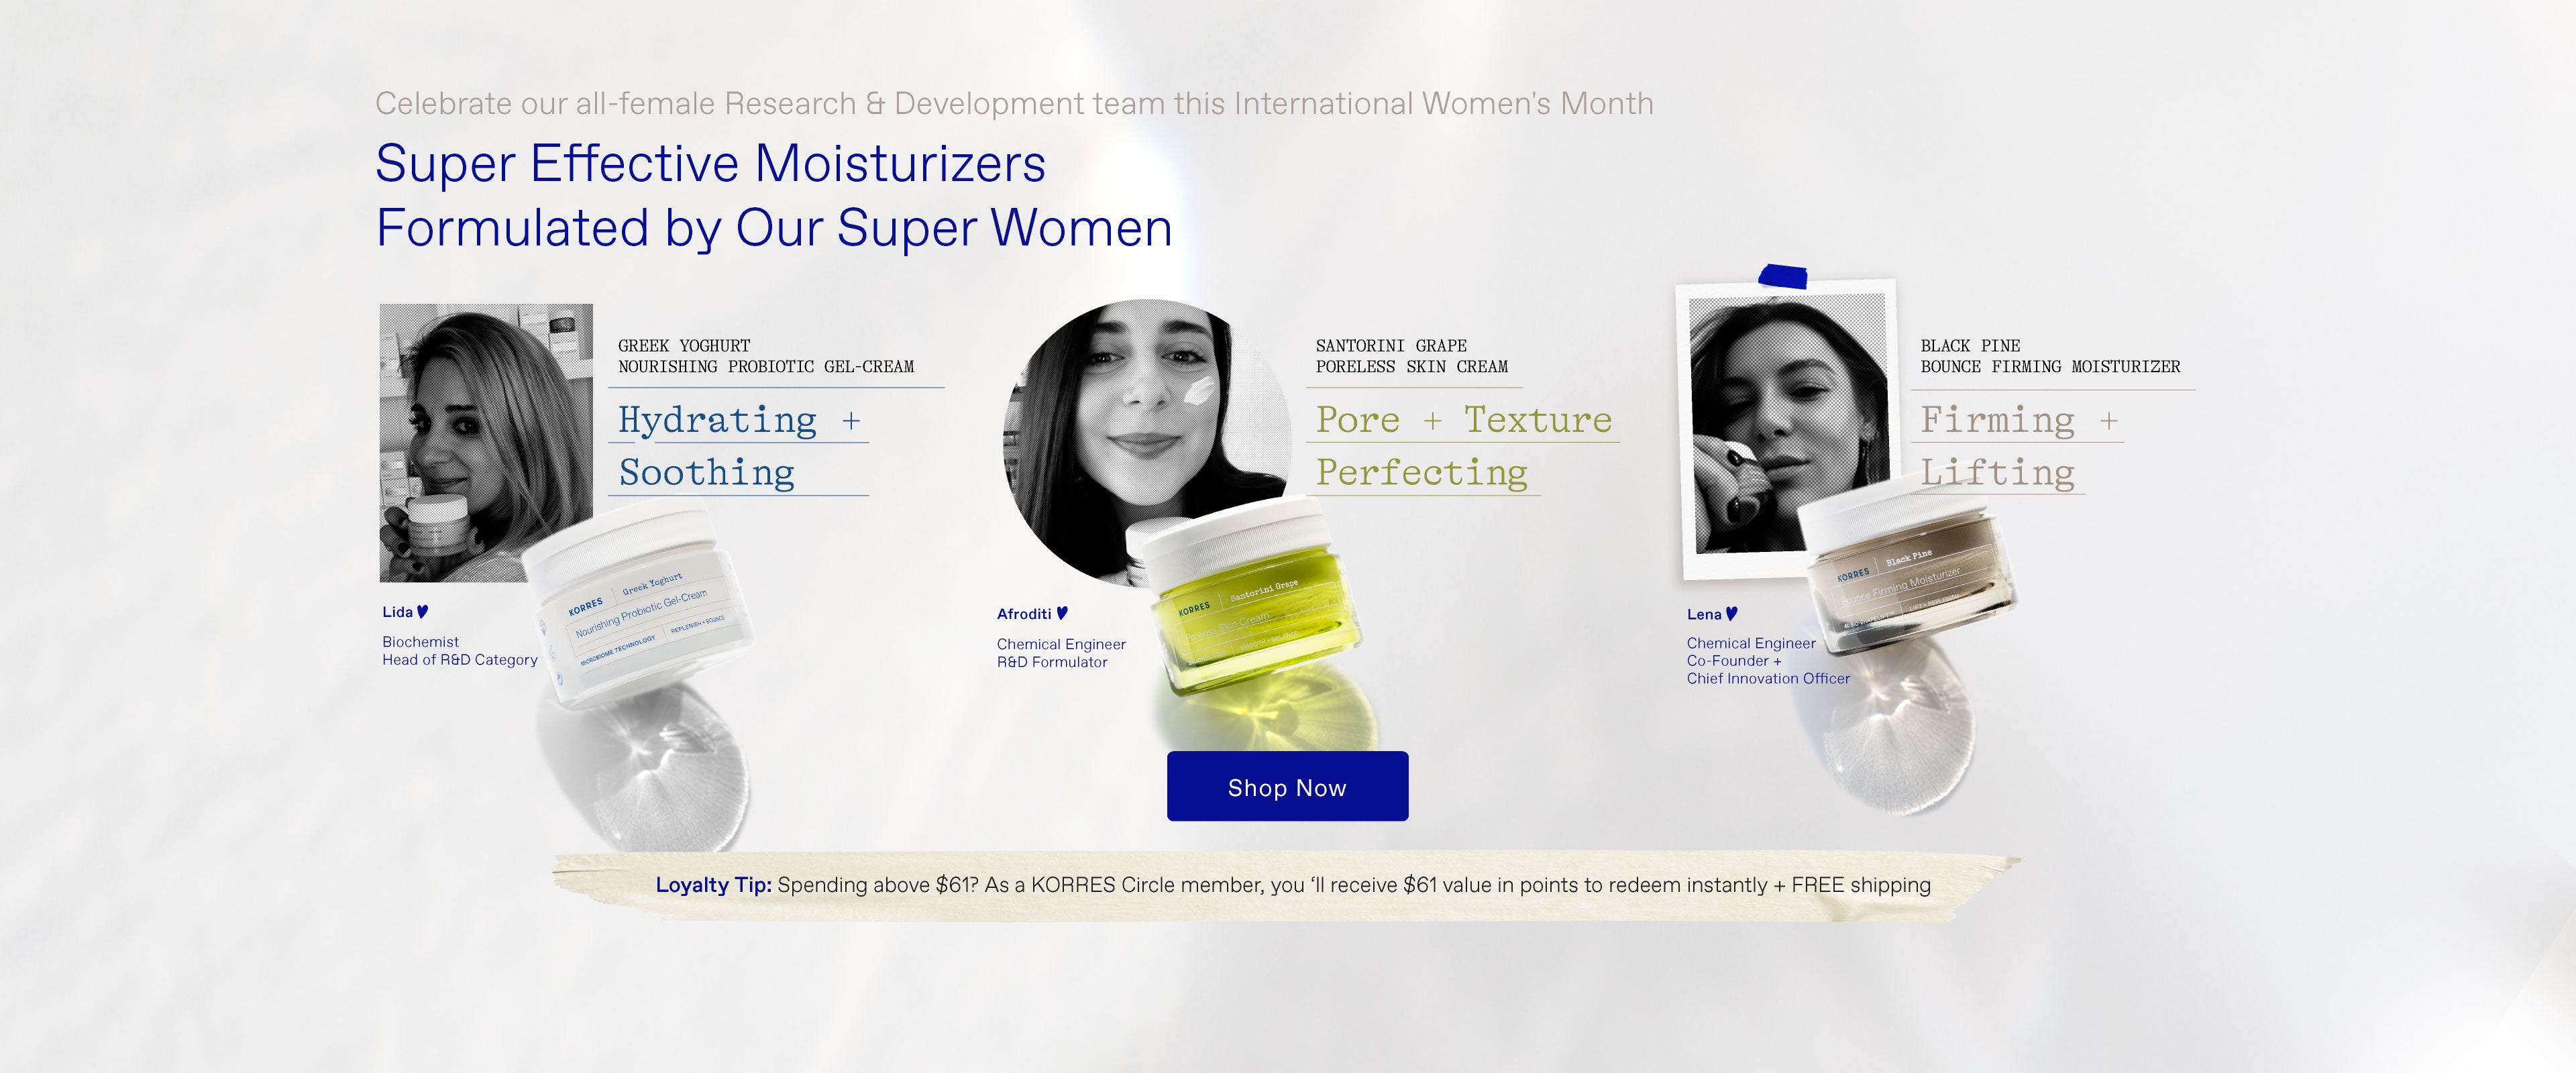 Super Effective Moisturizers Formulated By Our Super Women